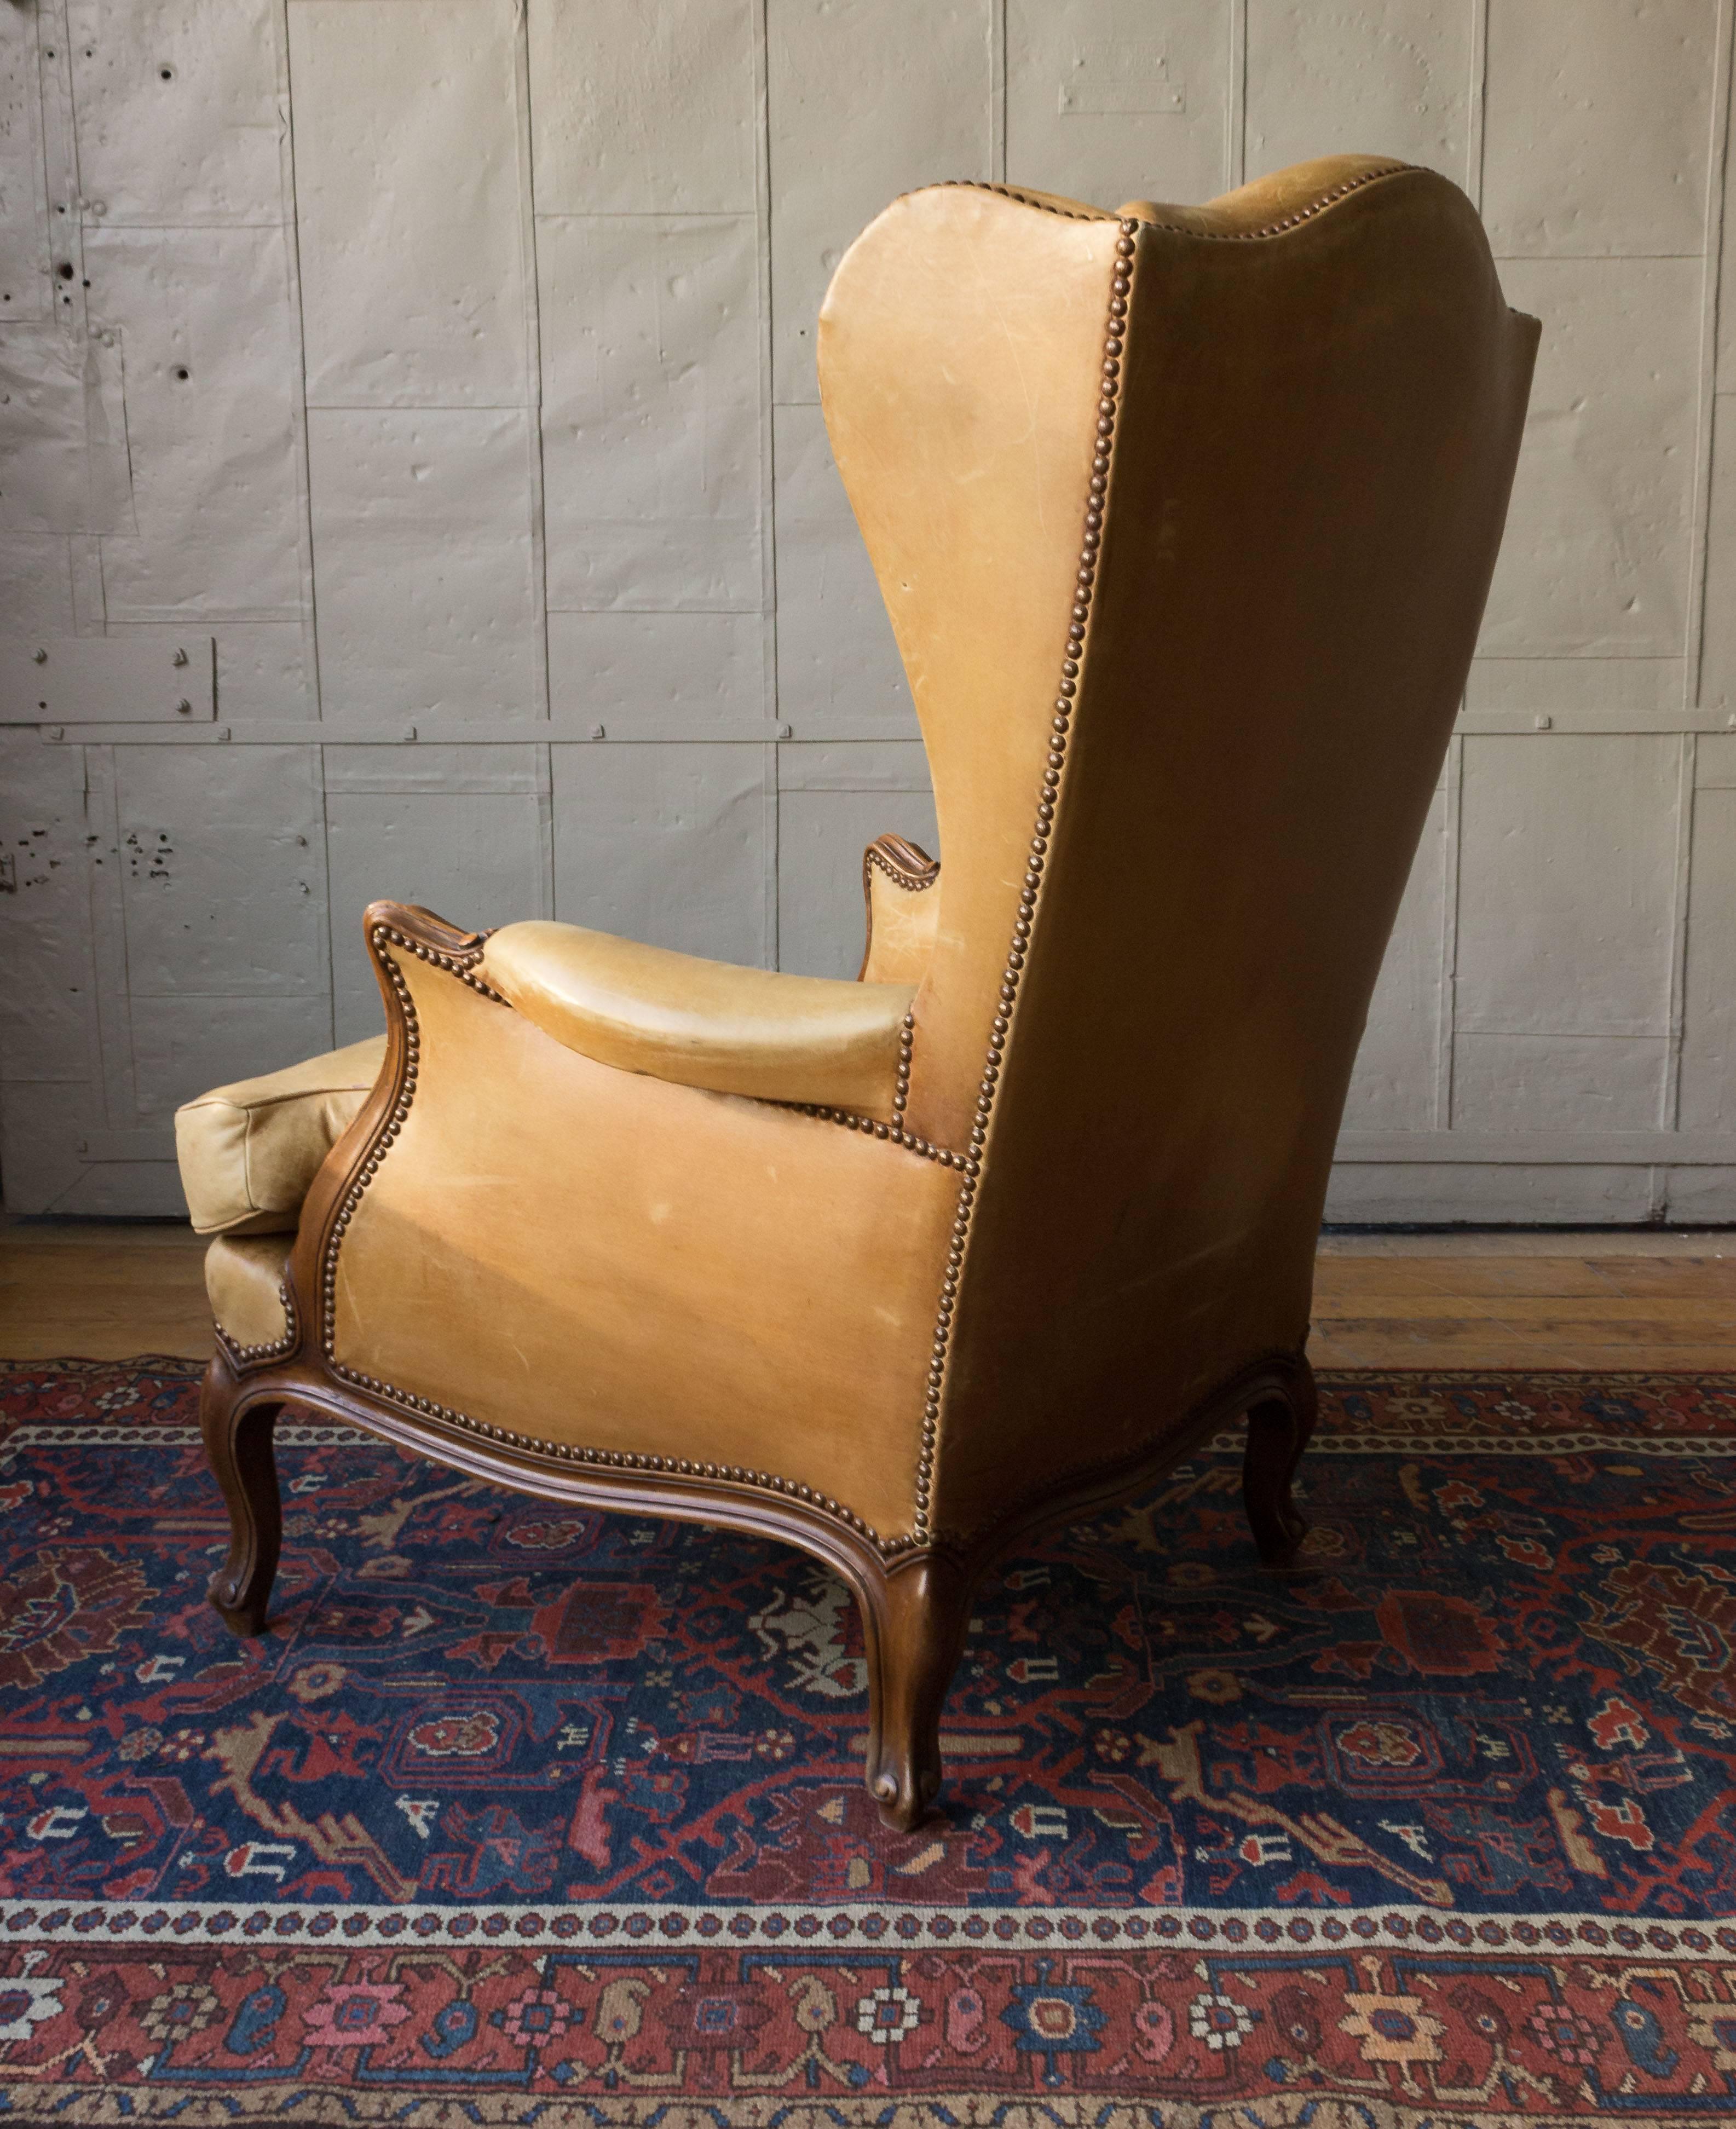 A very comfortable Louis XV style wingback armchair upholstered in a soft tan leather. Add a touch of old-world sophistication to your living space with this exquisite American Louis XV style wingback armchair. Upholstered in a soft tan leather and